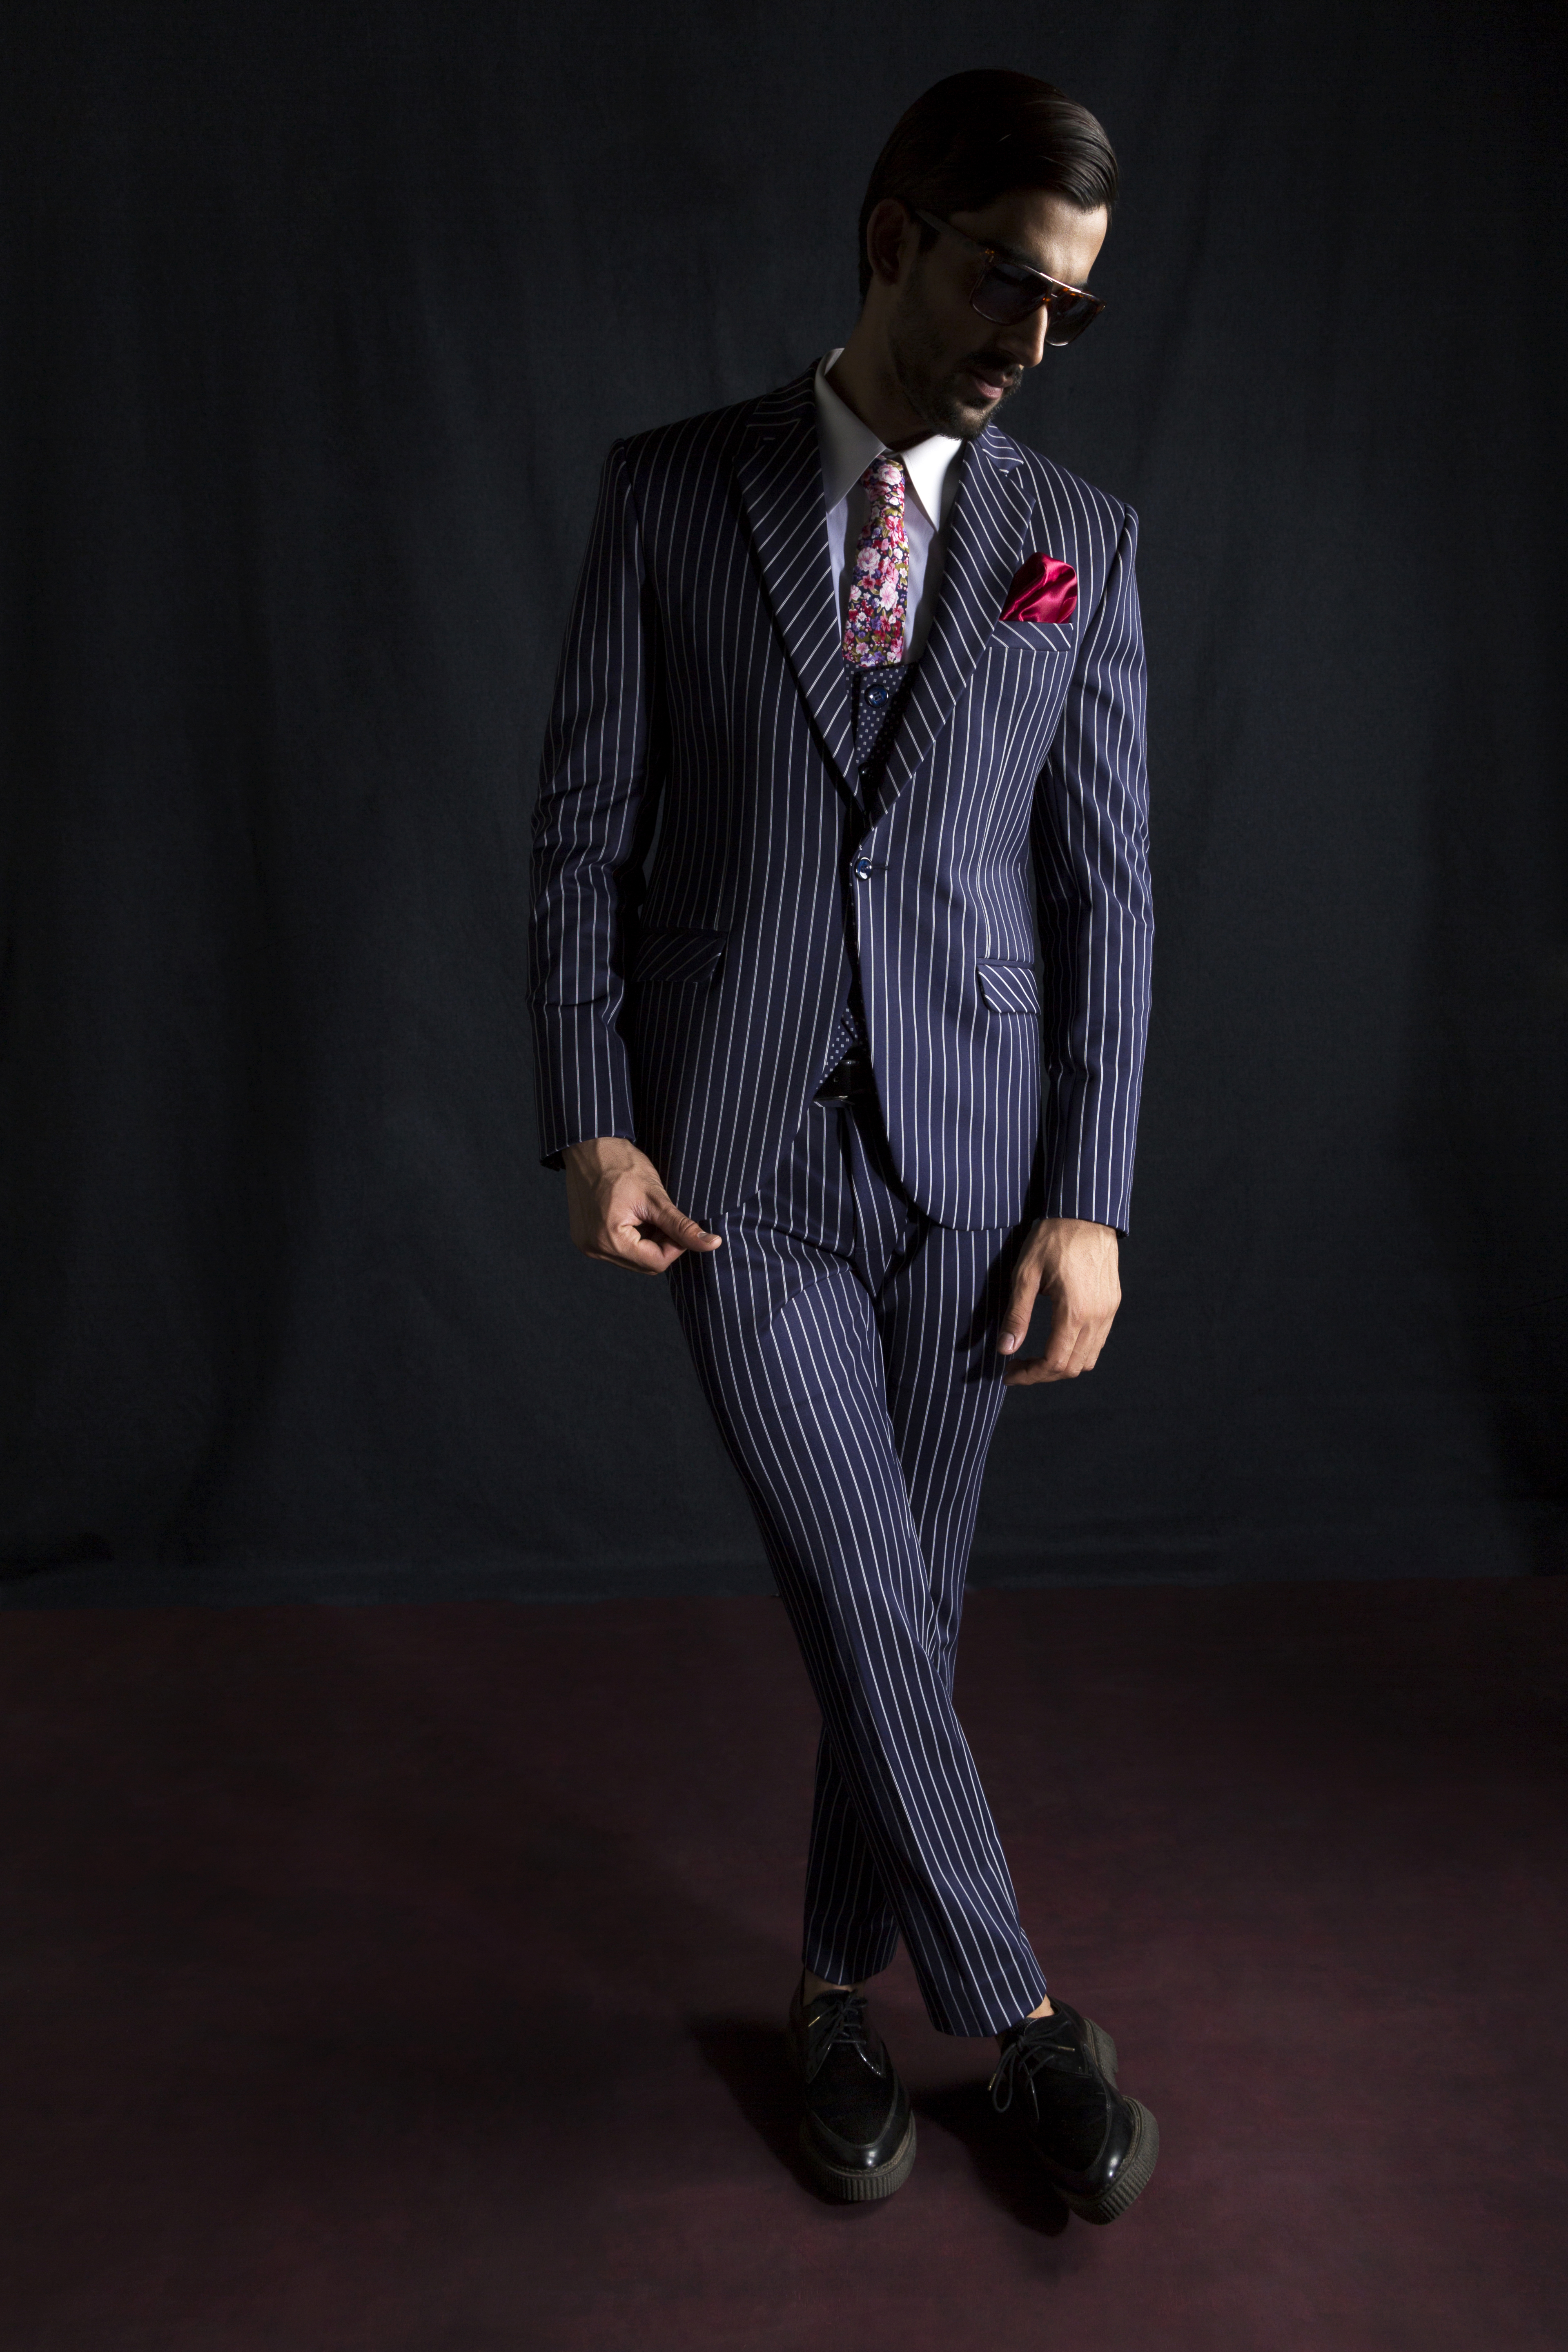 Tweed Suit | Maroon Men's Suit | Three Piece Suit | SAINLY-tuongthan.vn